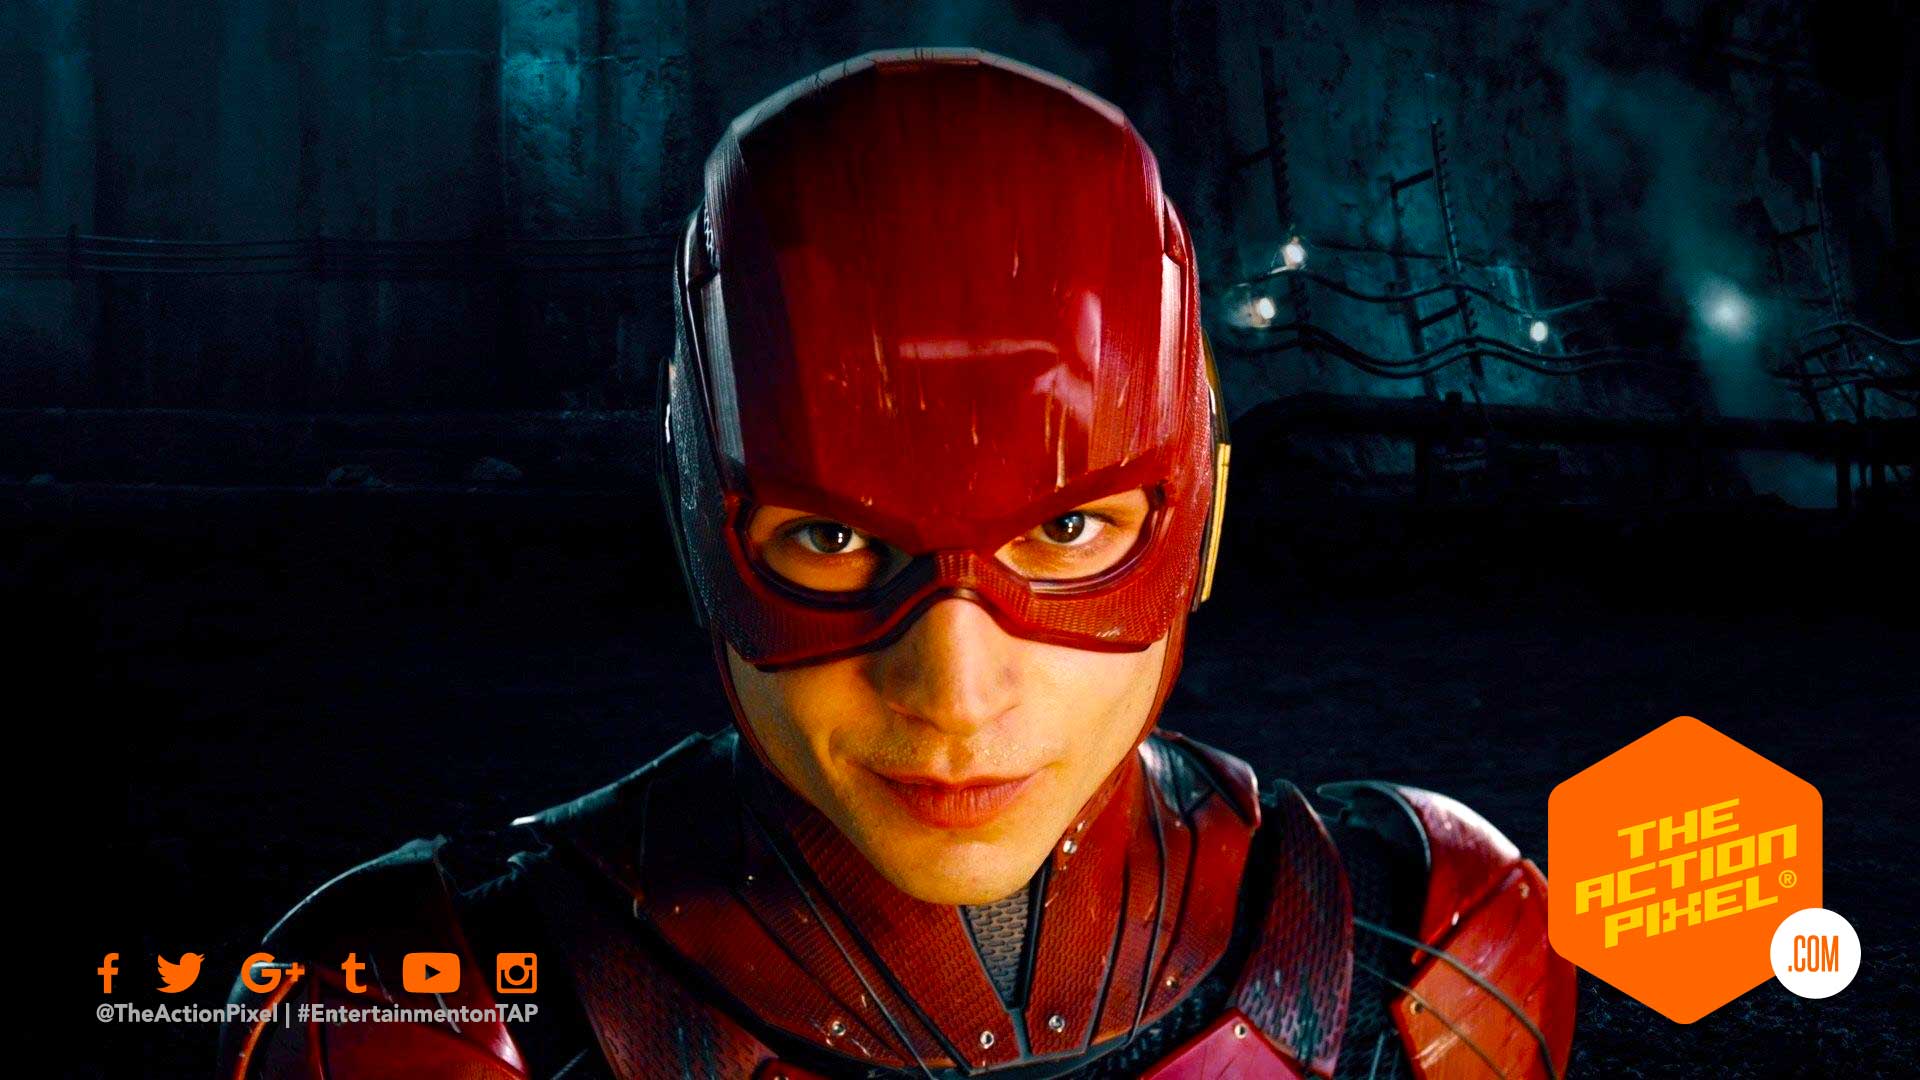 the flash, wb , dc comics, wb pictures, warner bros. pictures, ezra miller, the flash, flash, it, it movie, it chapter two, entertainment on tap, the action pixel, featured